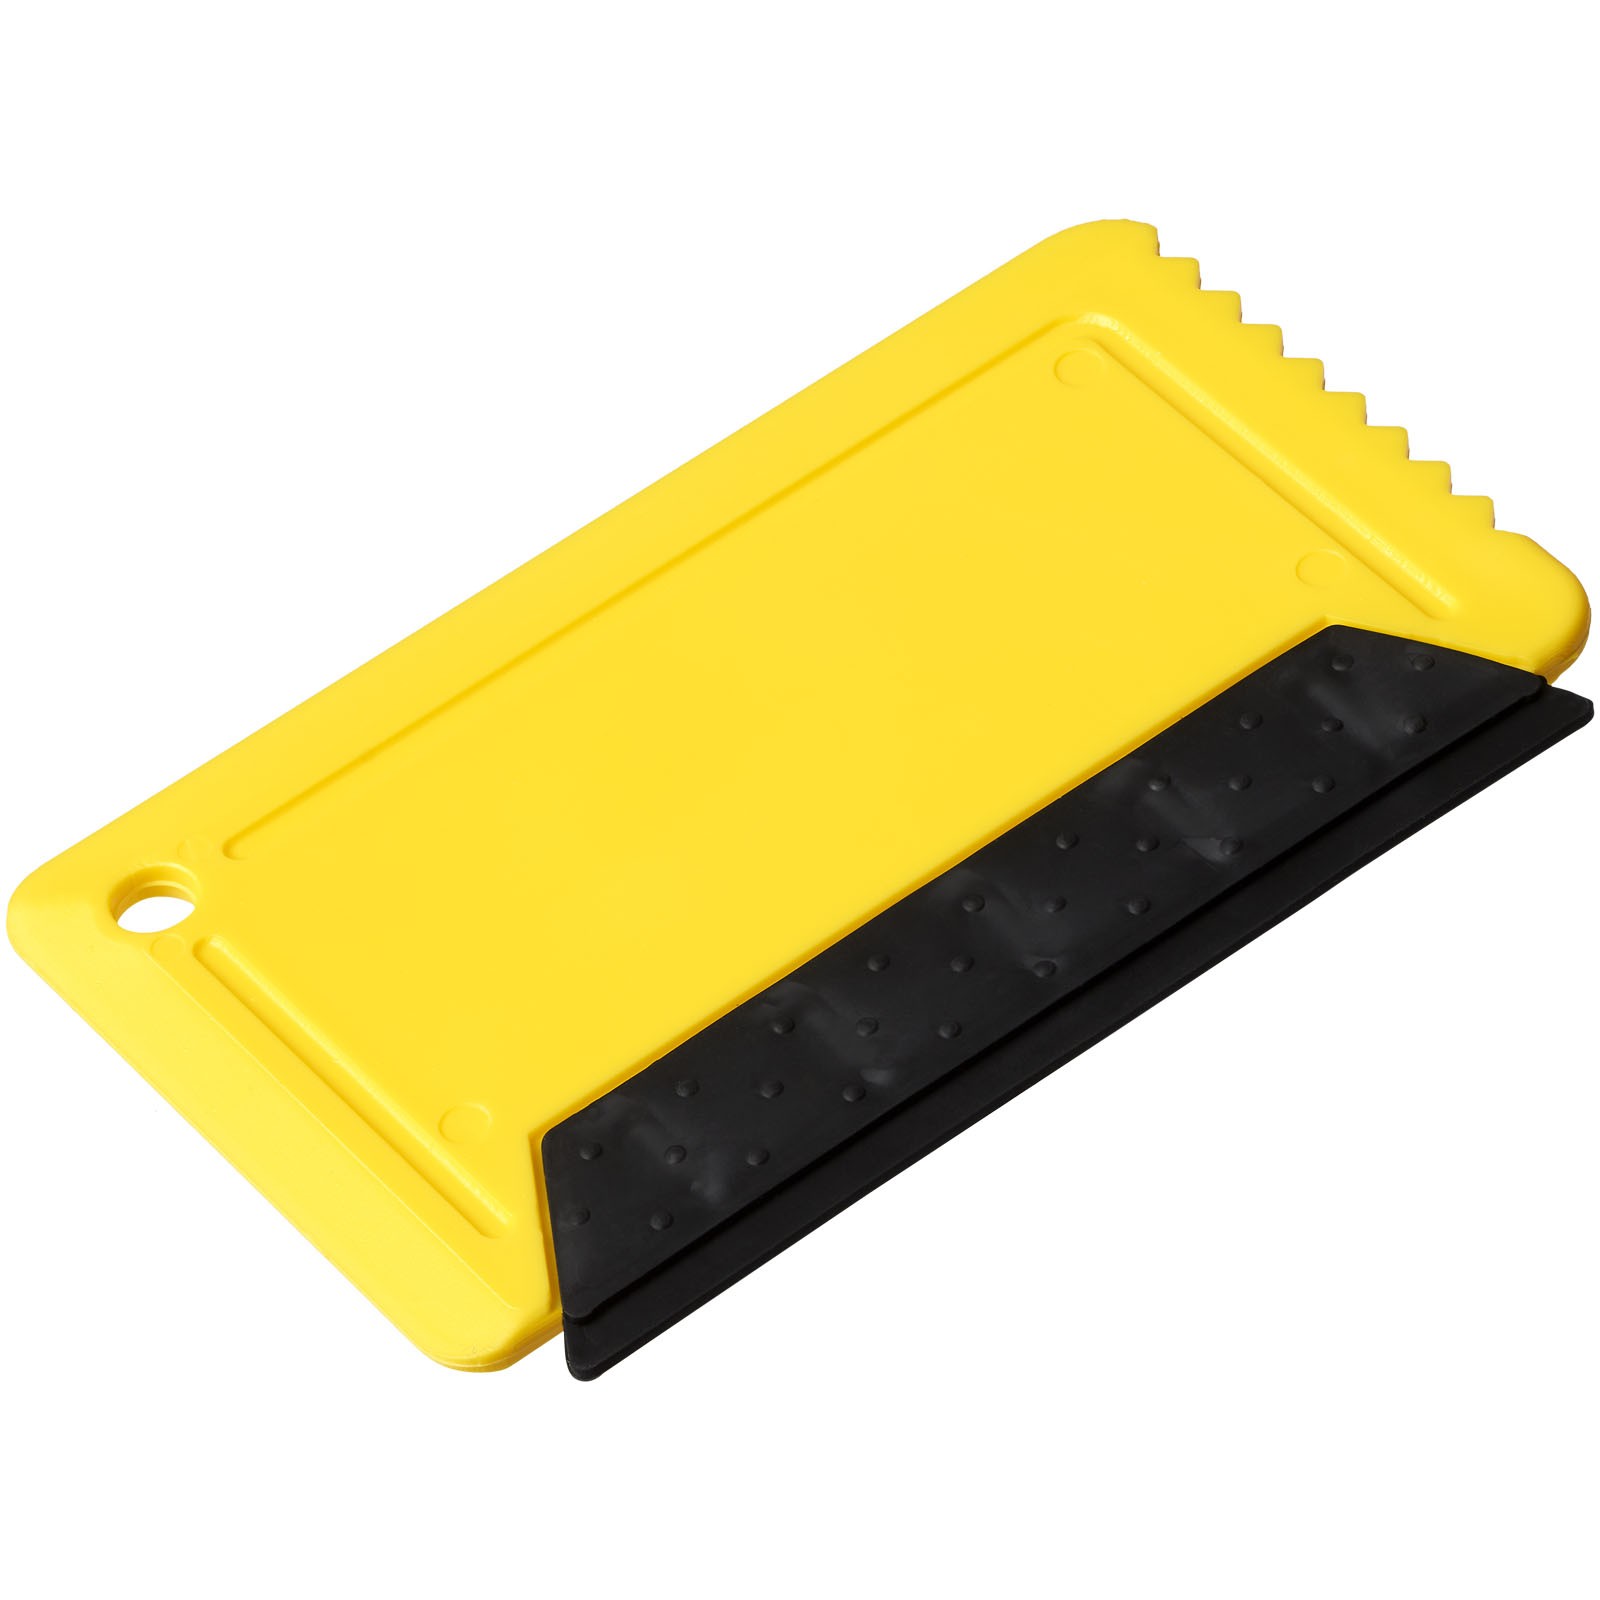 Freeze credit card sized ice scraper with rubber - Yellow